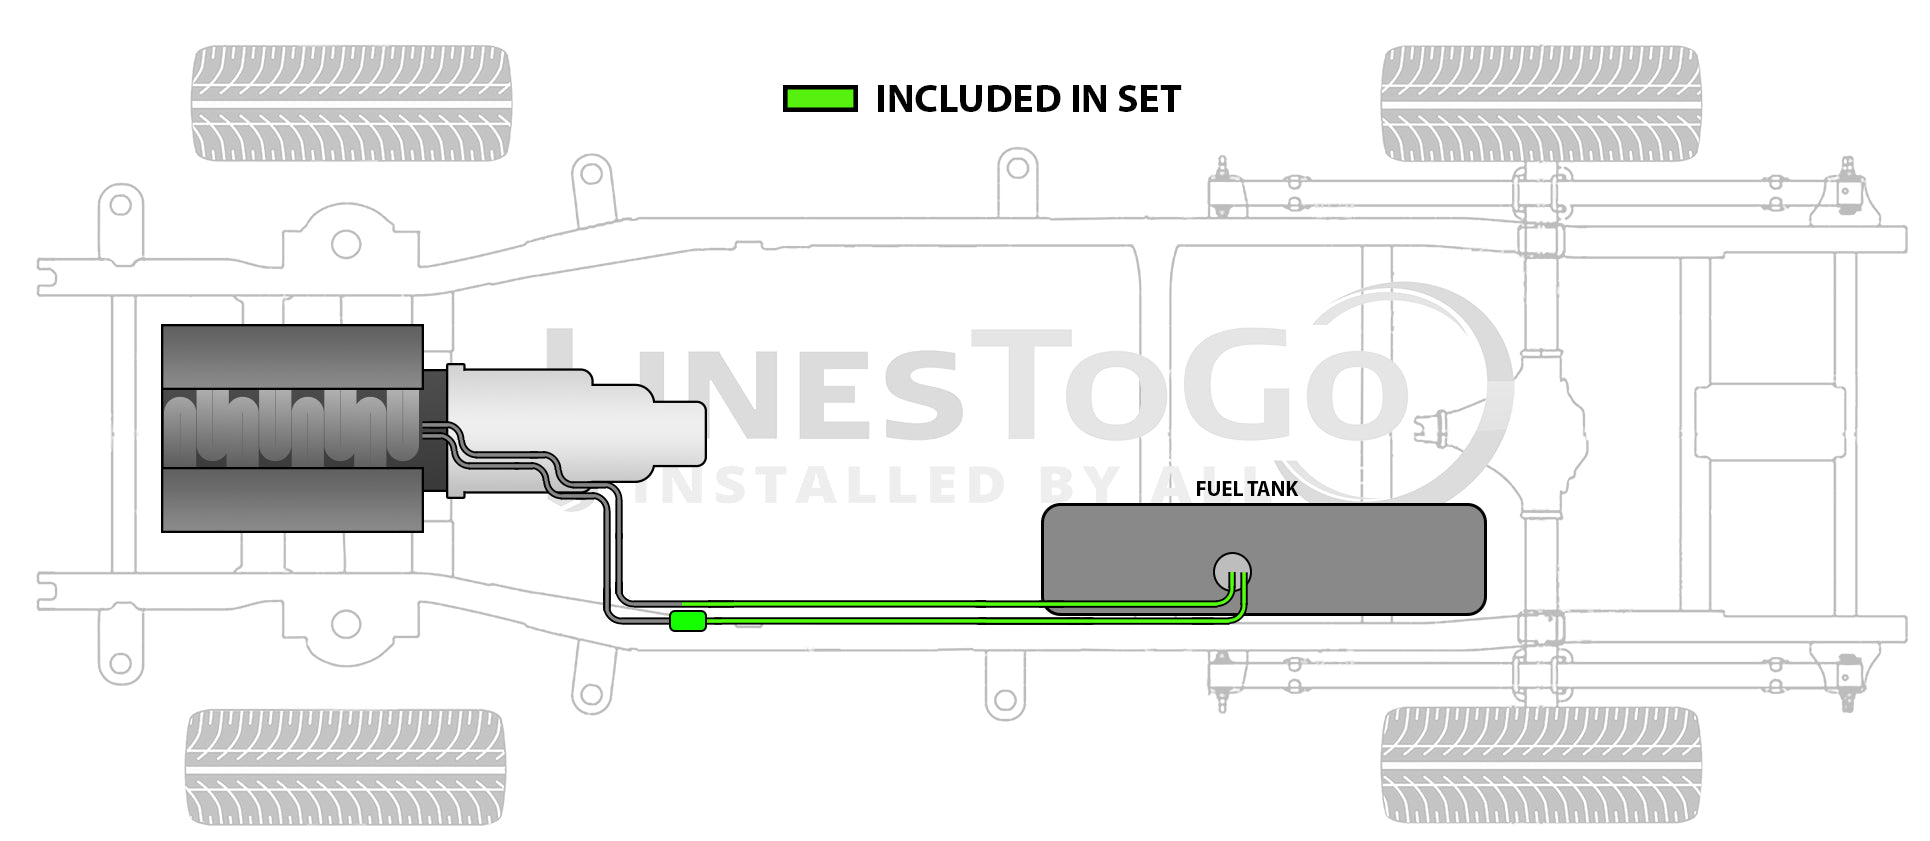 Chevy Truck Rear Fuel Line Set 1994 Reg Cab 8 ft Bed 4WD 4.3L Gas SS400-S1E Stainless Steel